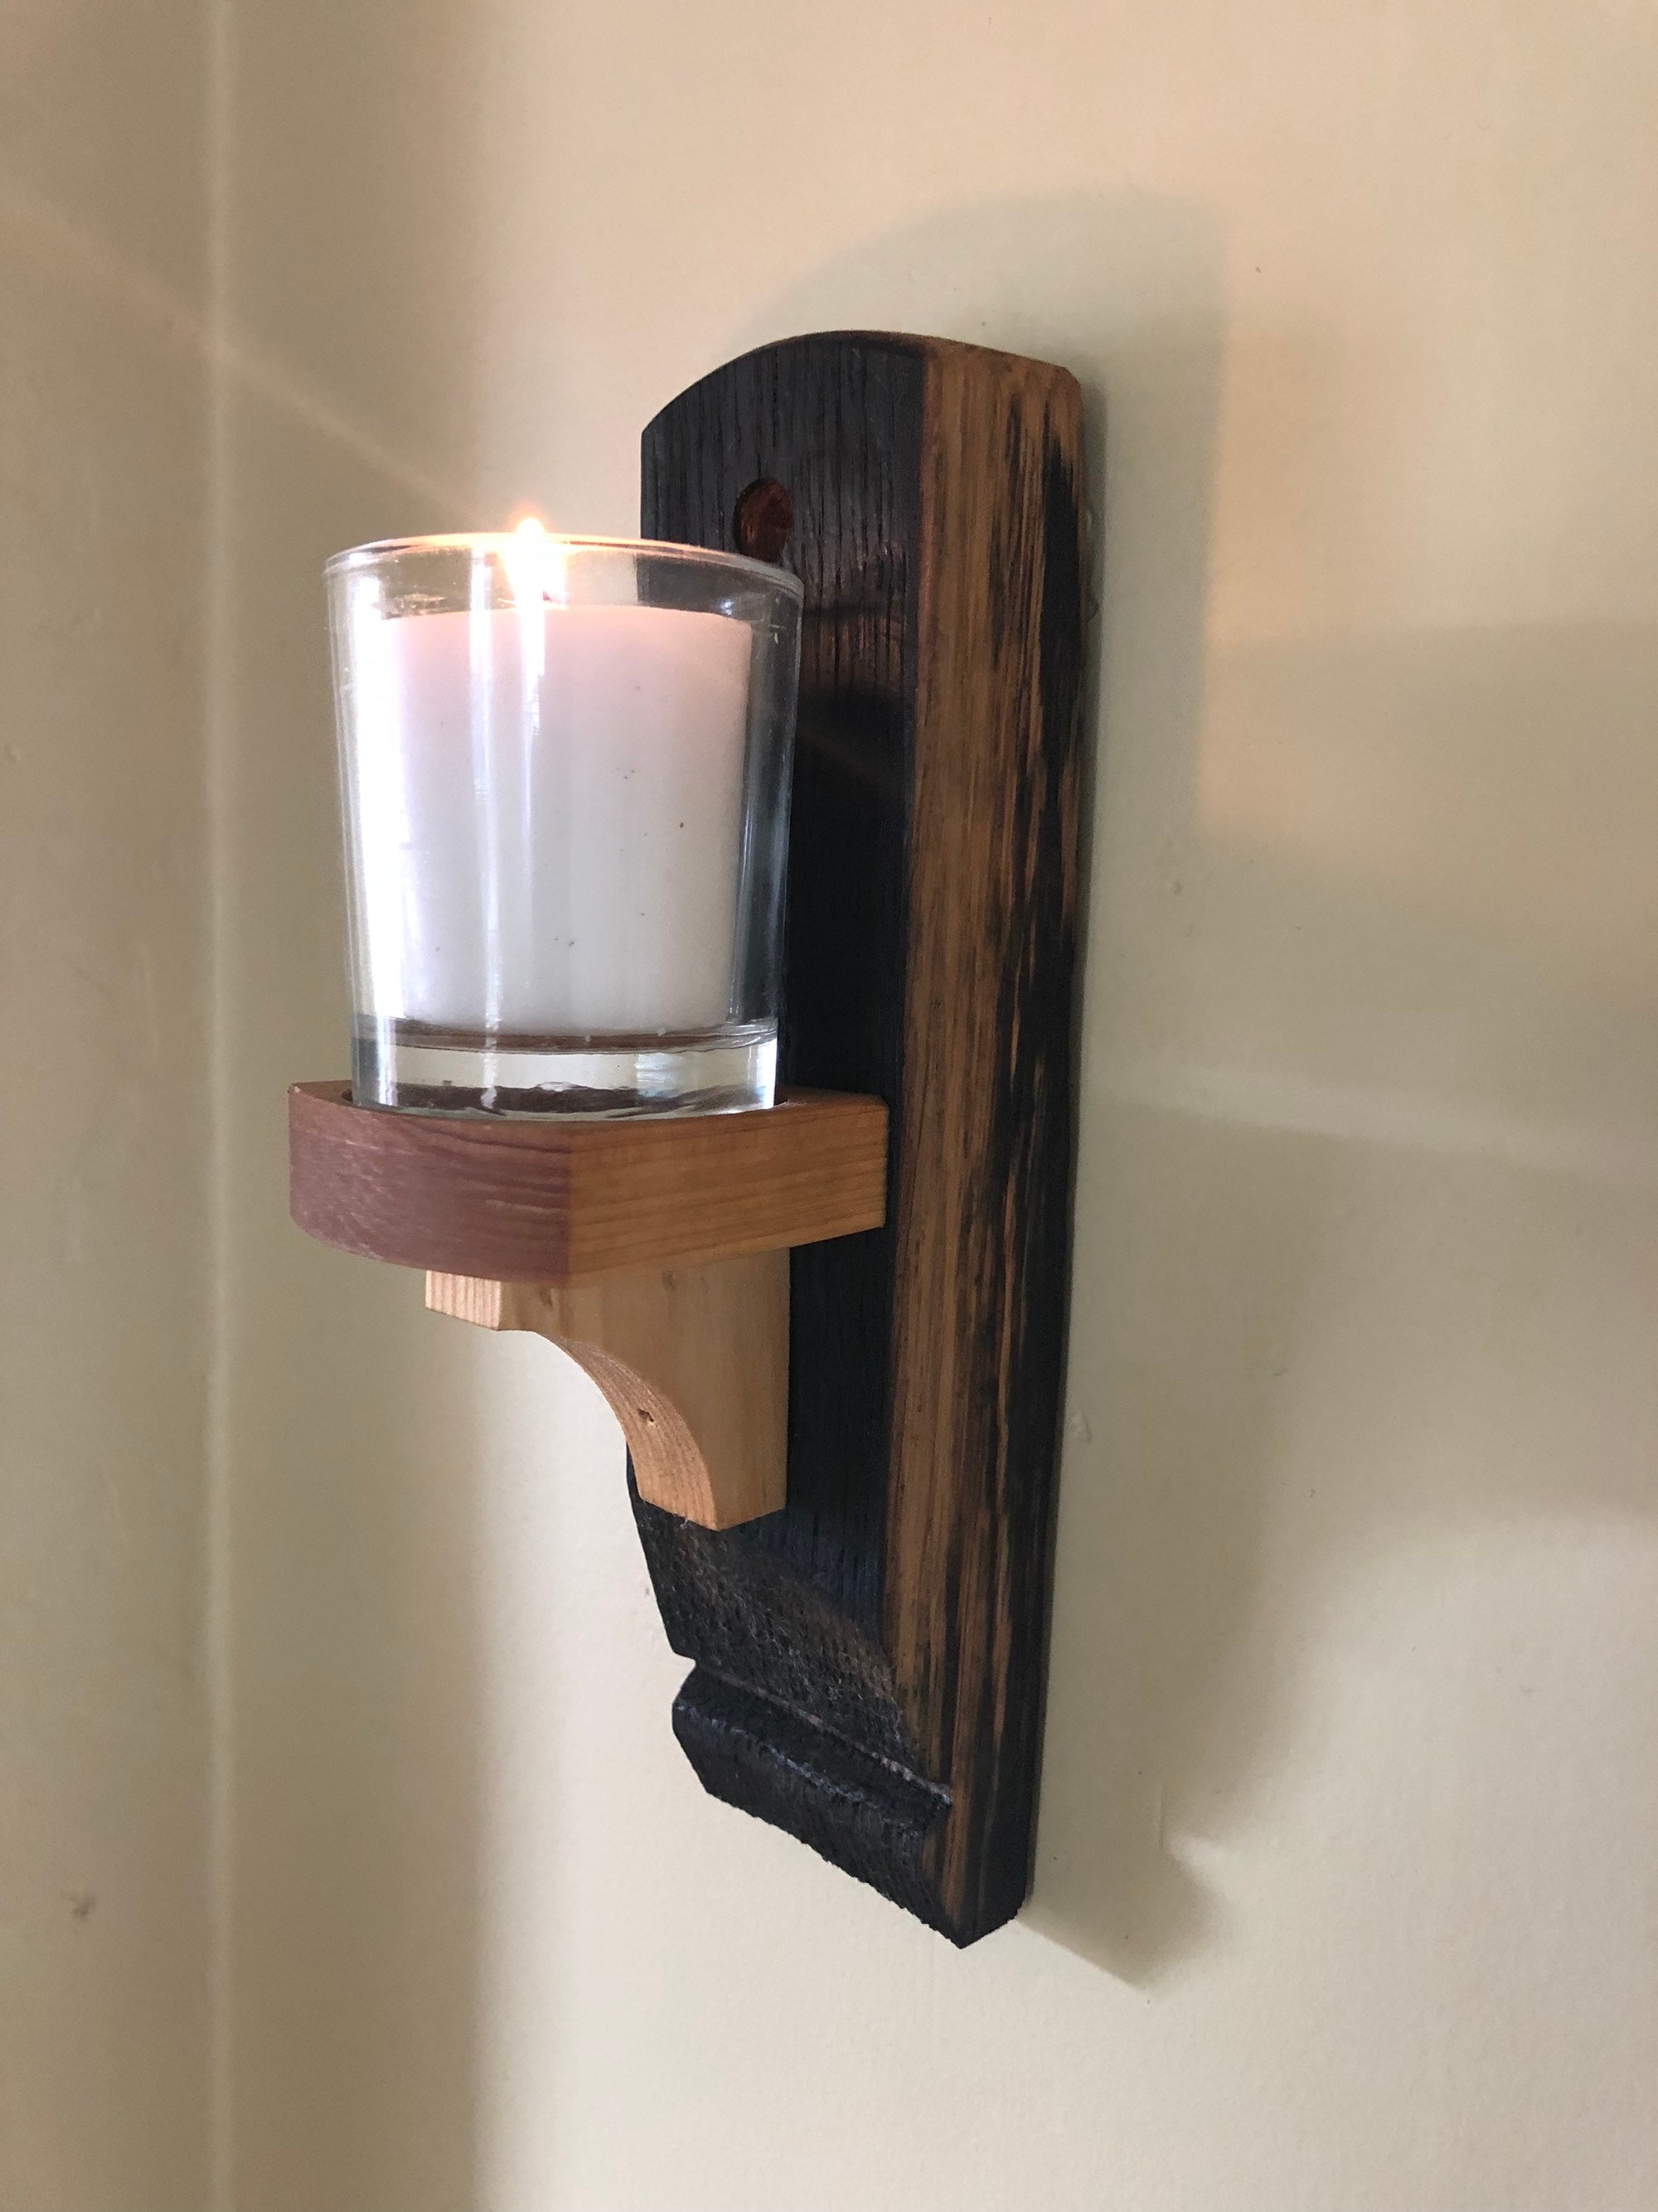 GOTHIC STYLE RESIN SCONCE PLAQUE WITH OAK EFFECT CANDLE HOLDER WALL MOUNTED 